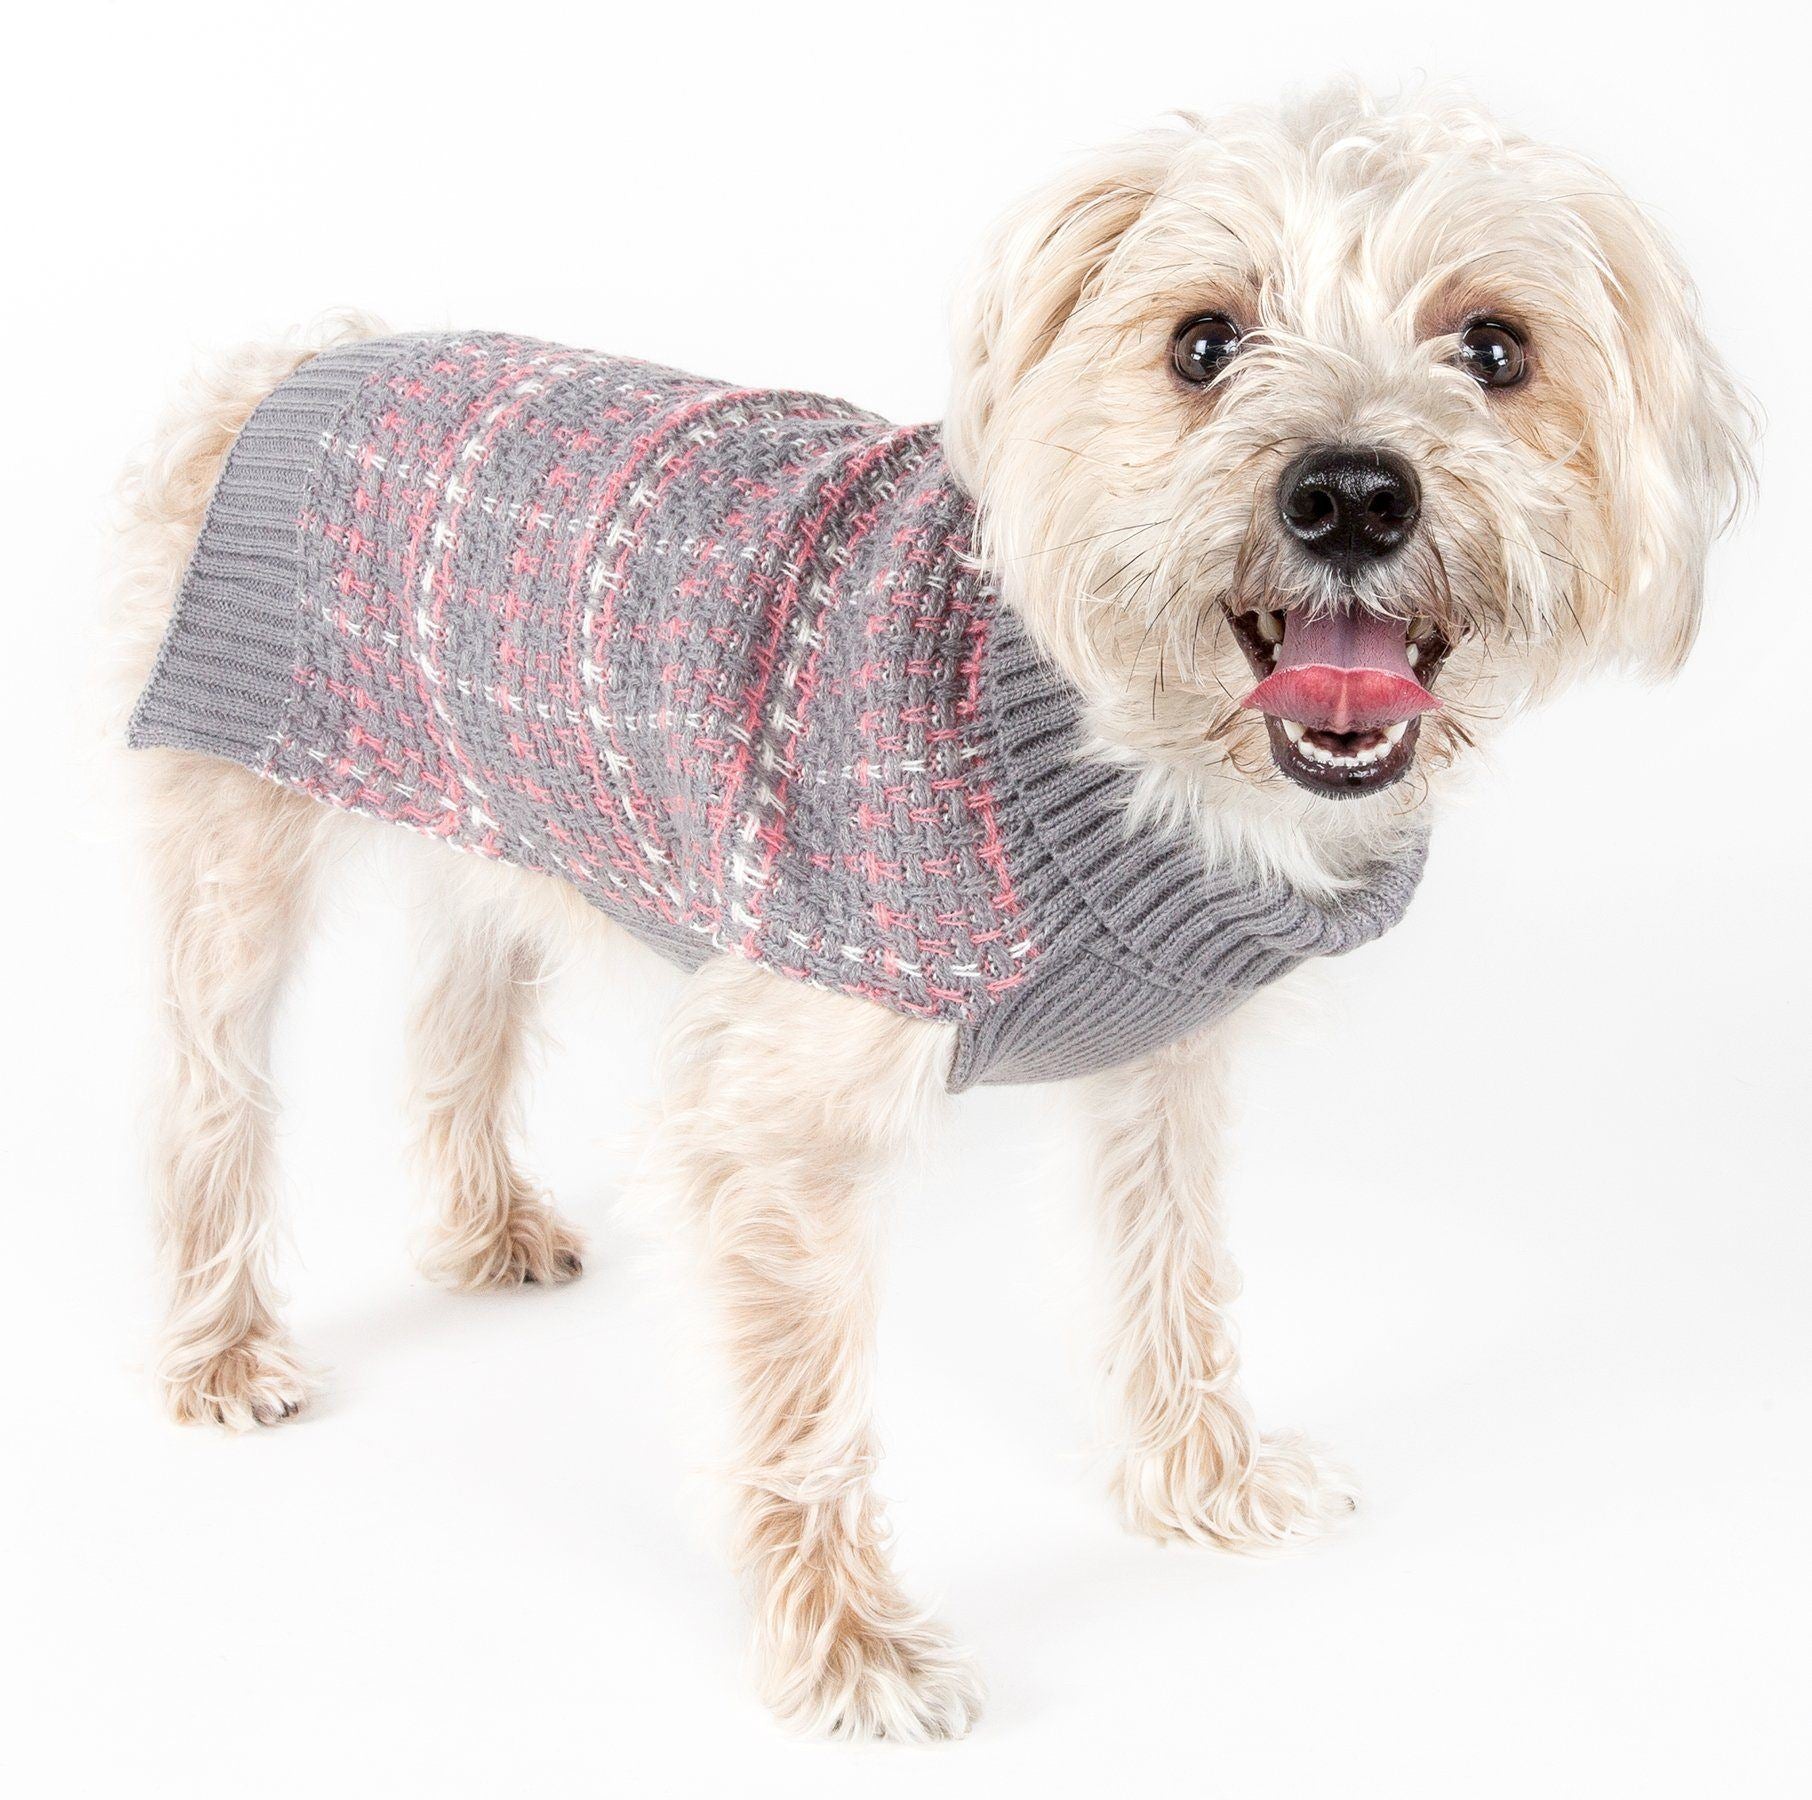 Pet Life ® Vintage Symphony Static Fashion Knitted Designer Dog Sweater X-Small Grey, Pink And White